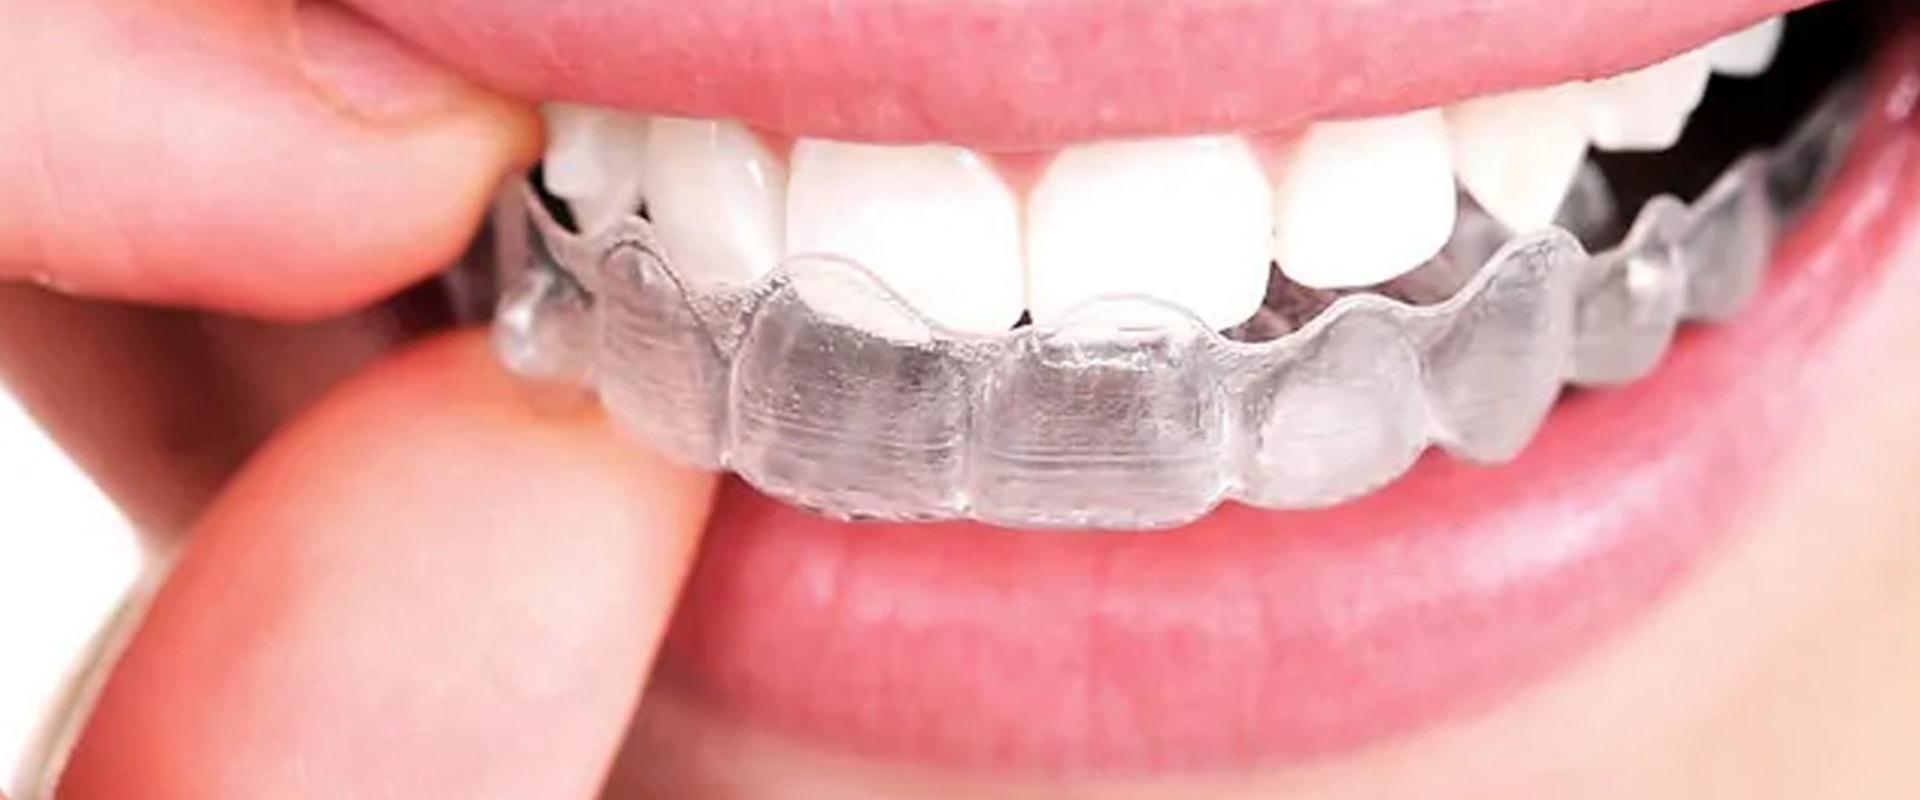 How much should I expect to pay for invisalign?